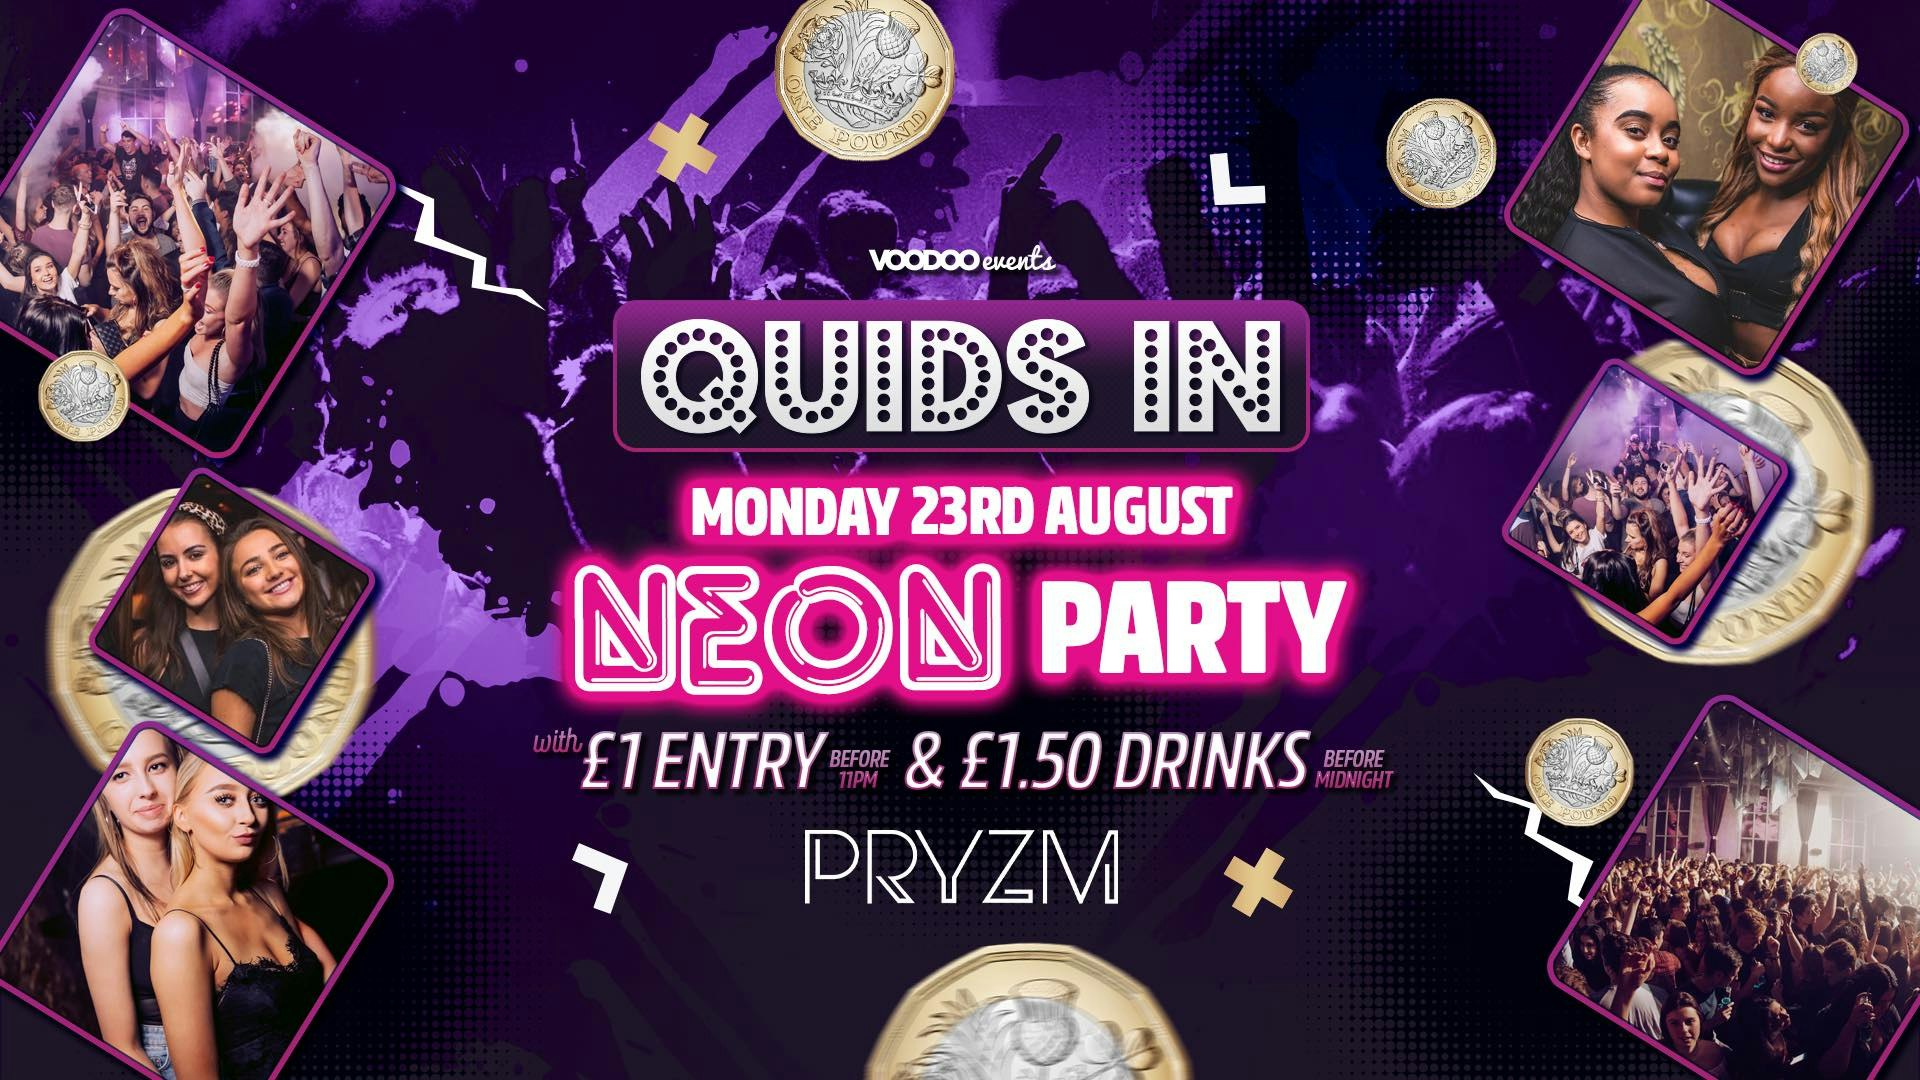 Quids In Mondays at PRYZM – 23rd August NEON PARTY